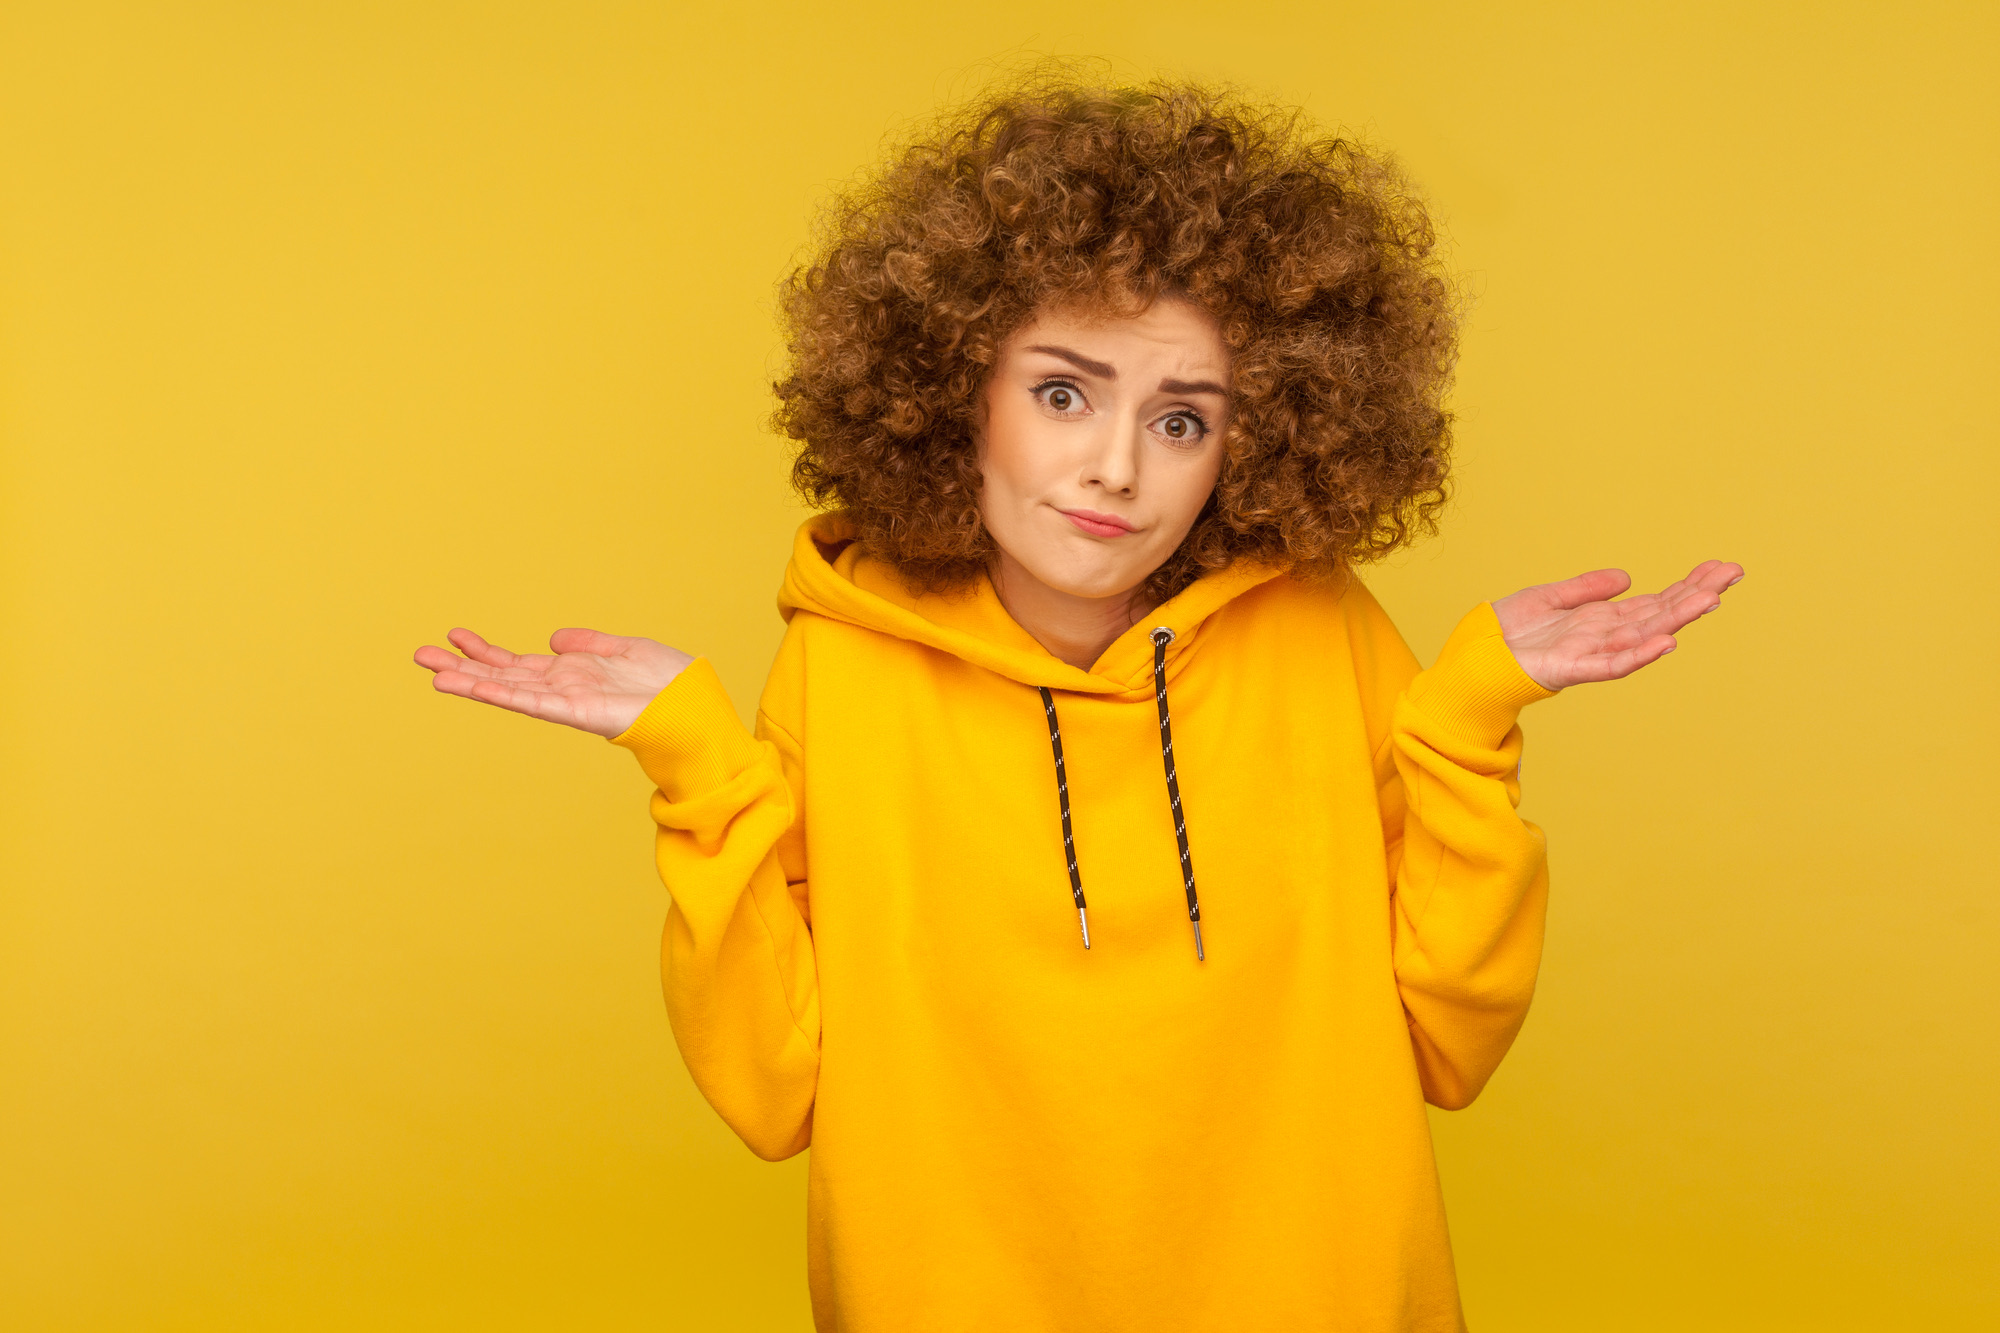 Don't know, sorry. Portrait of clueless uncertain confused curly-haired woman in urban style hoodie shrugging shoulders in questioning gesture, looking with indifference. indoor studio shot isolated